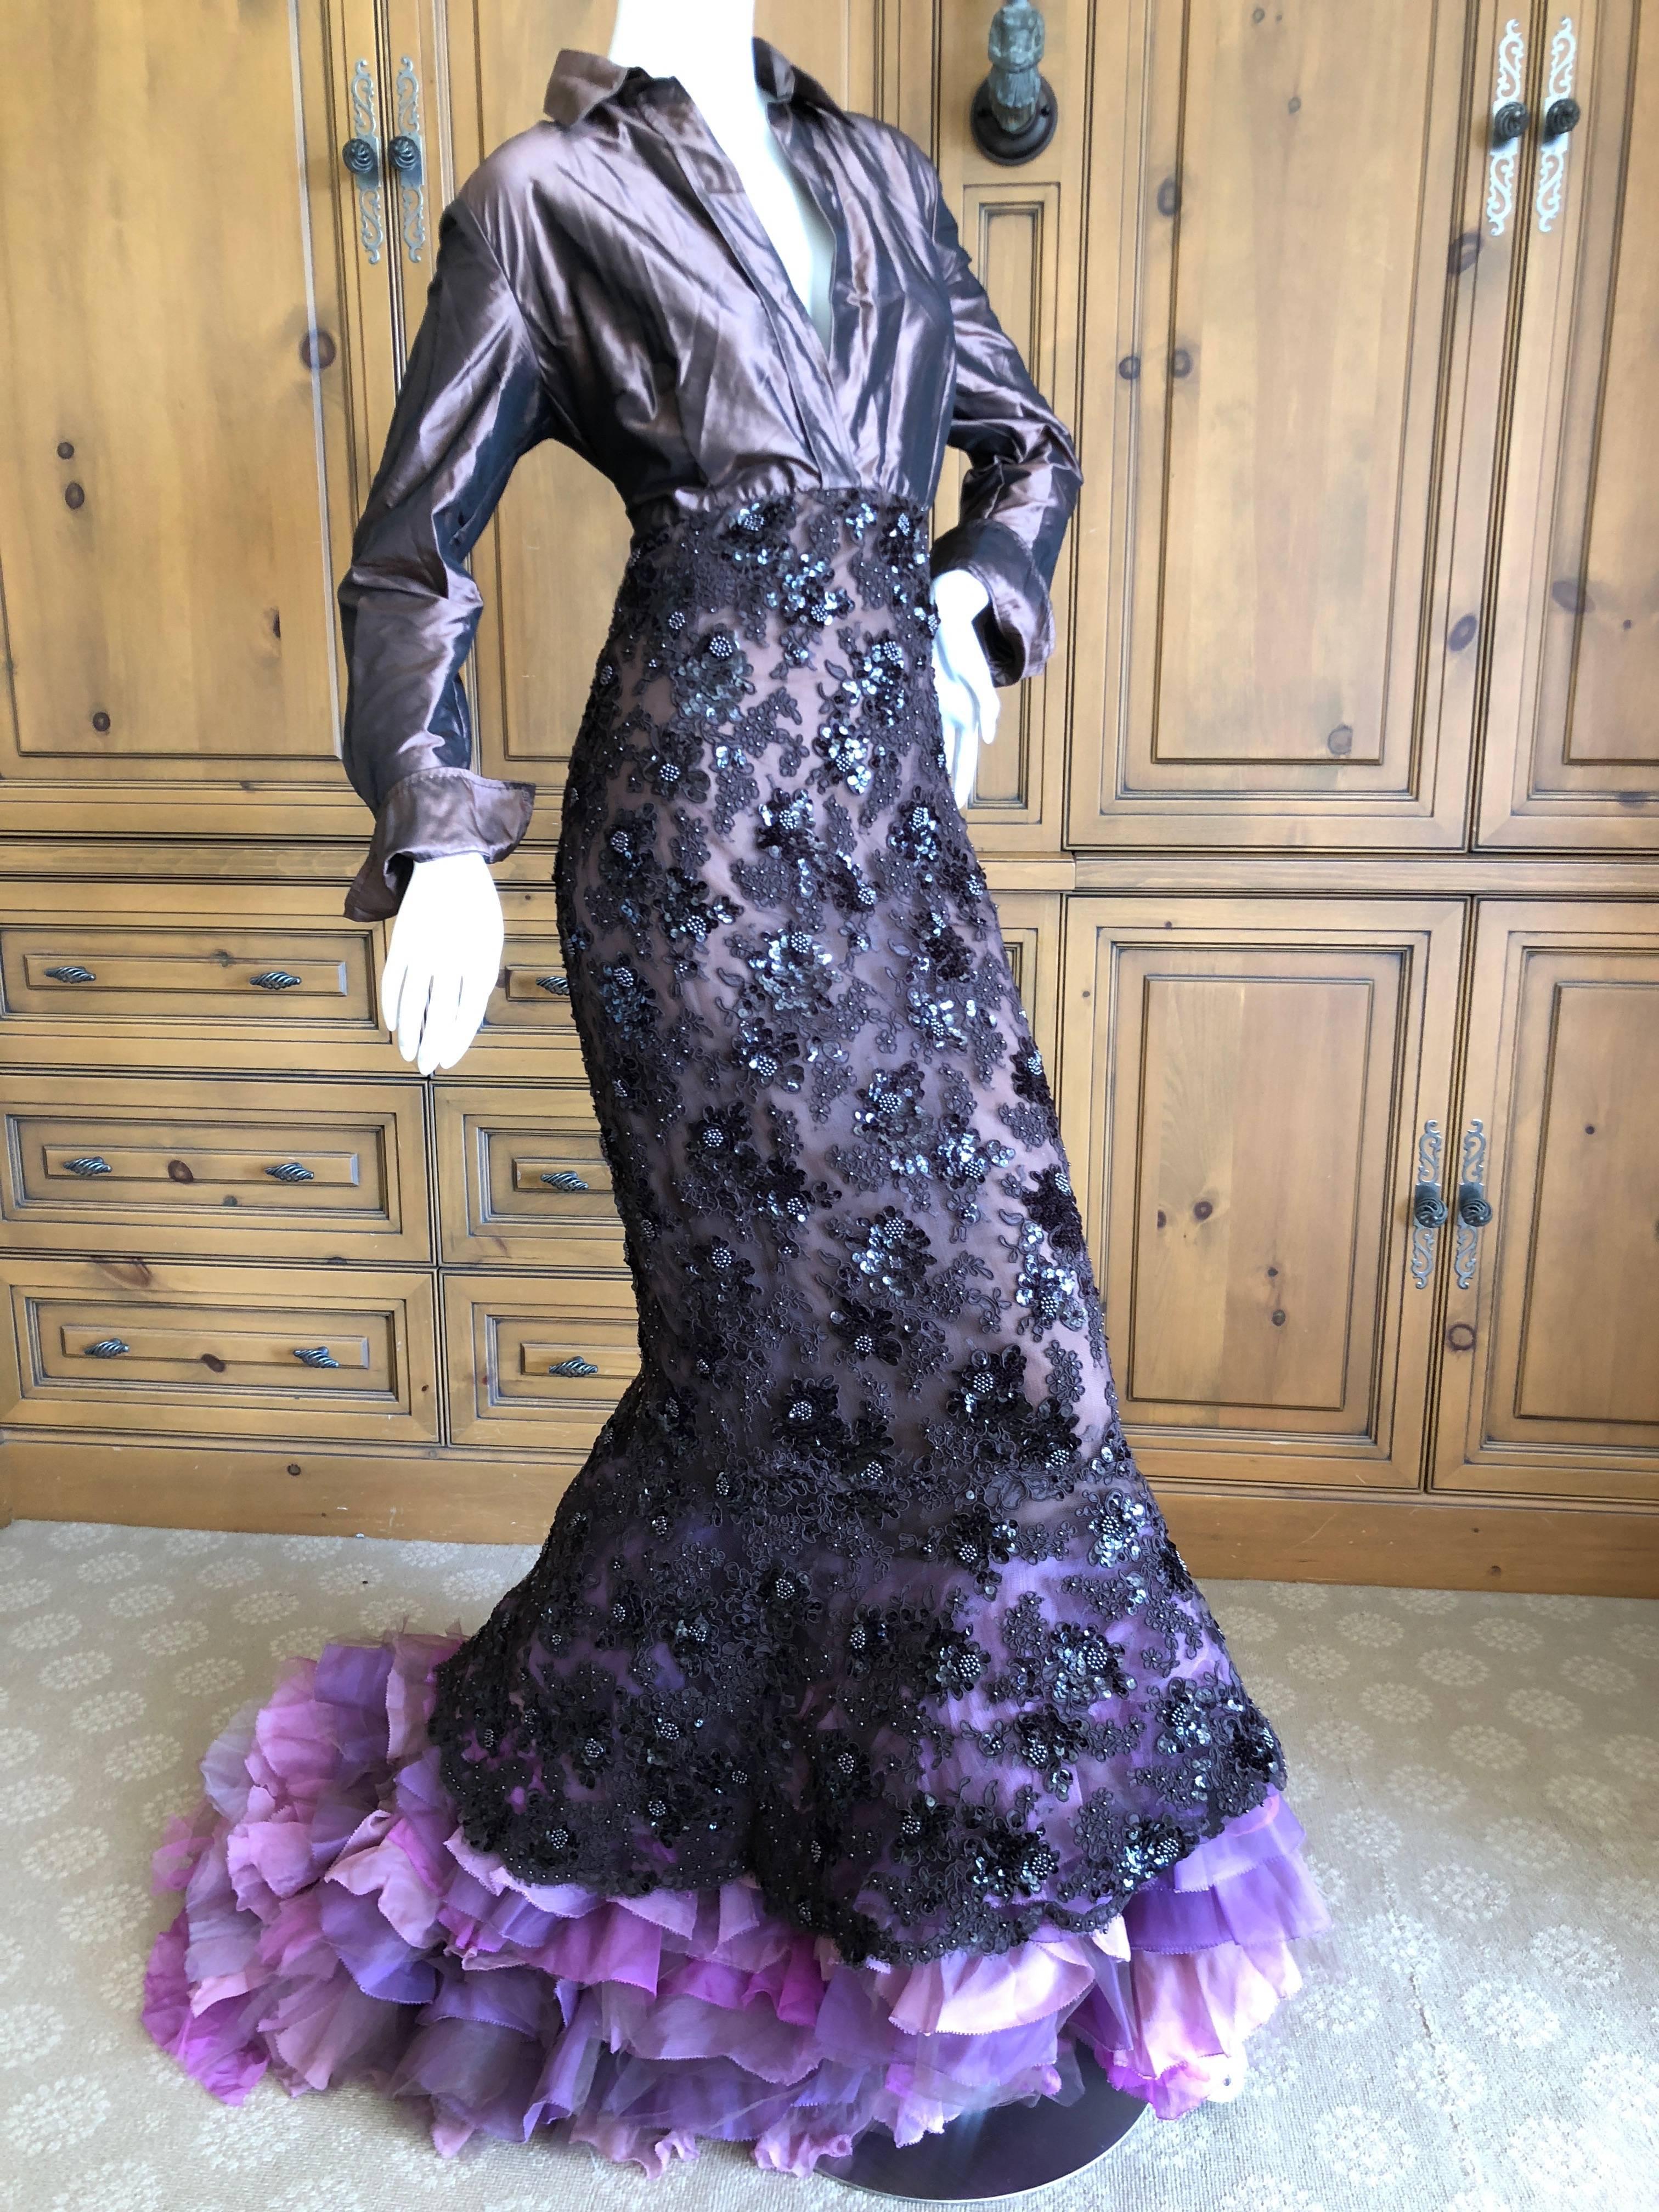 Isaac Mizrahi Embellished Evening Gown with Ruffled Flamenco Tulle Train In Excellent Condition For Sale In Cloverdale, CA